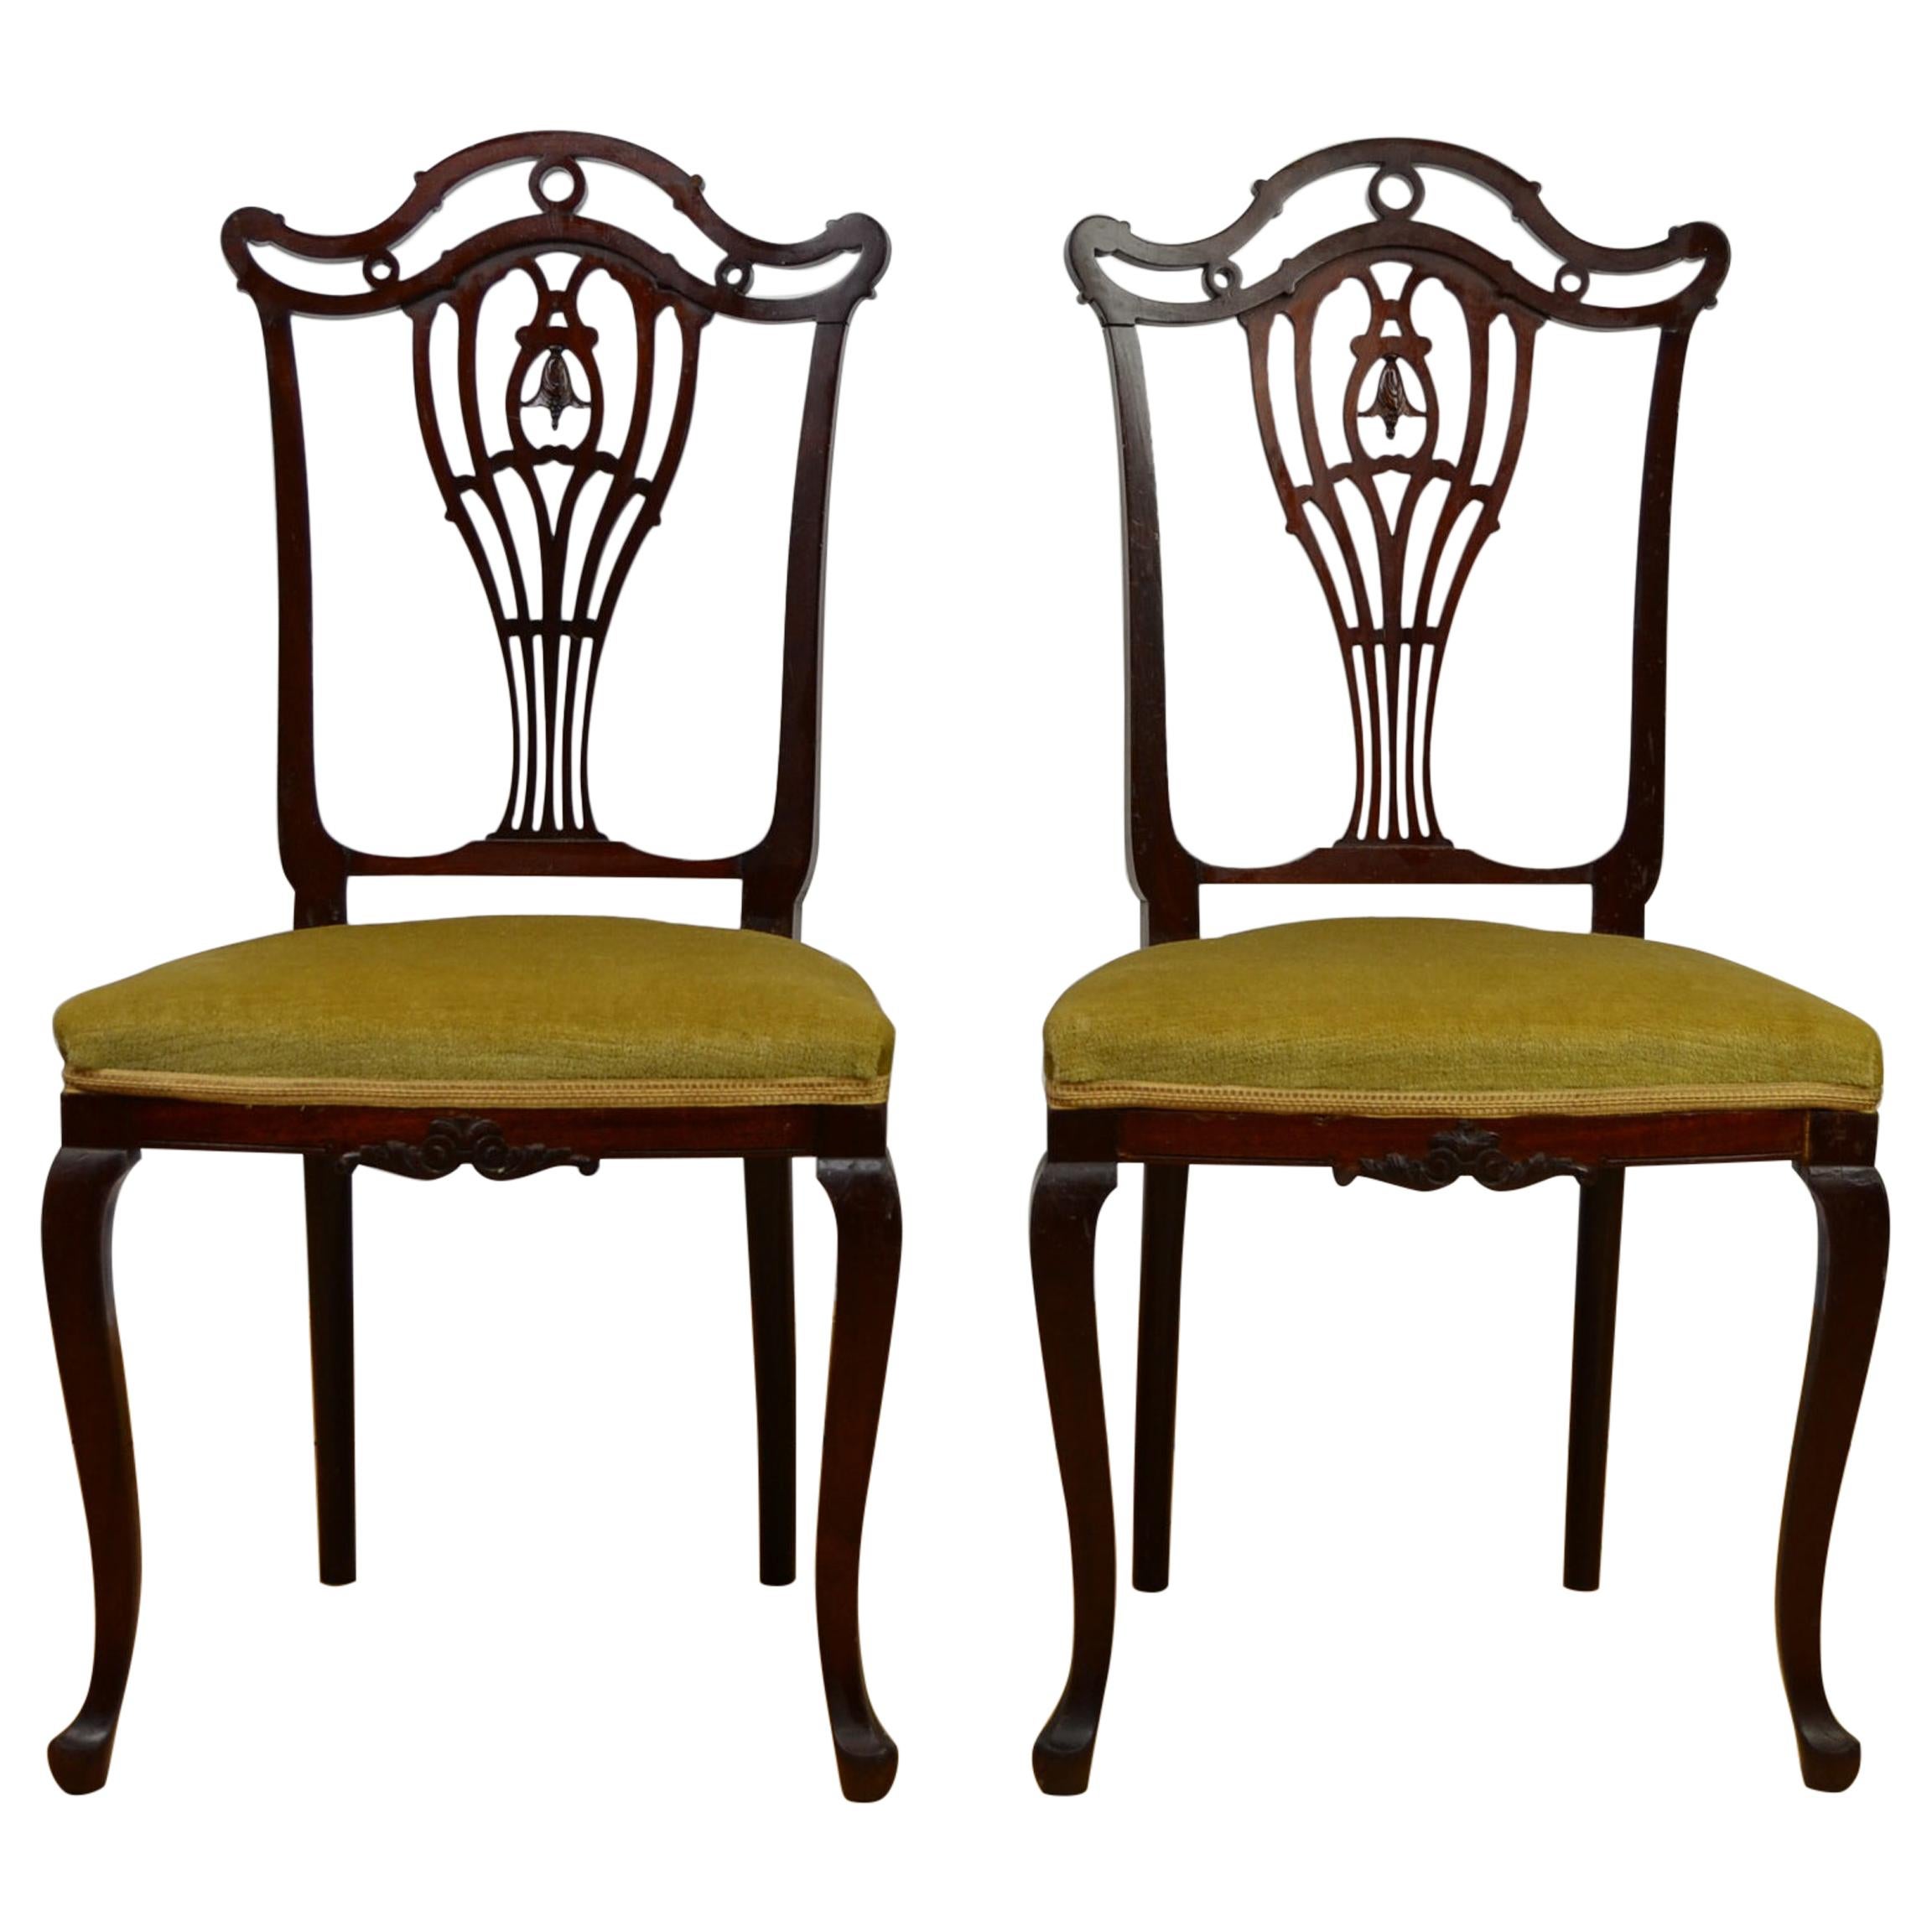 Hollandia Pander & Zn Pair of Side Chairs, Late 19th Century